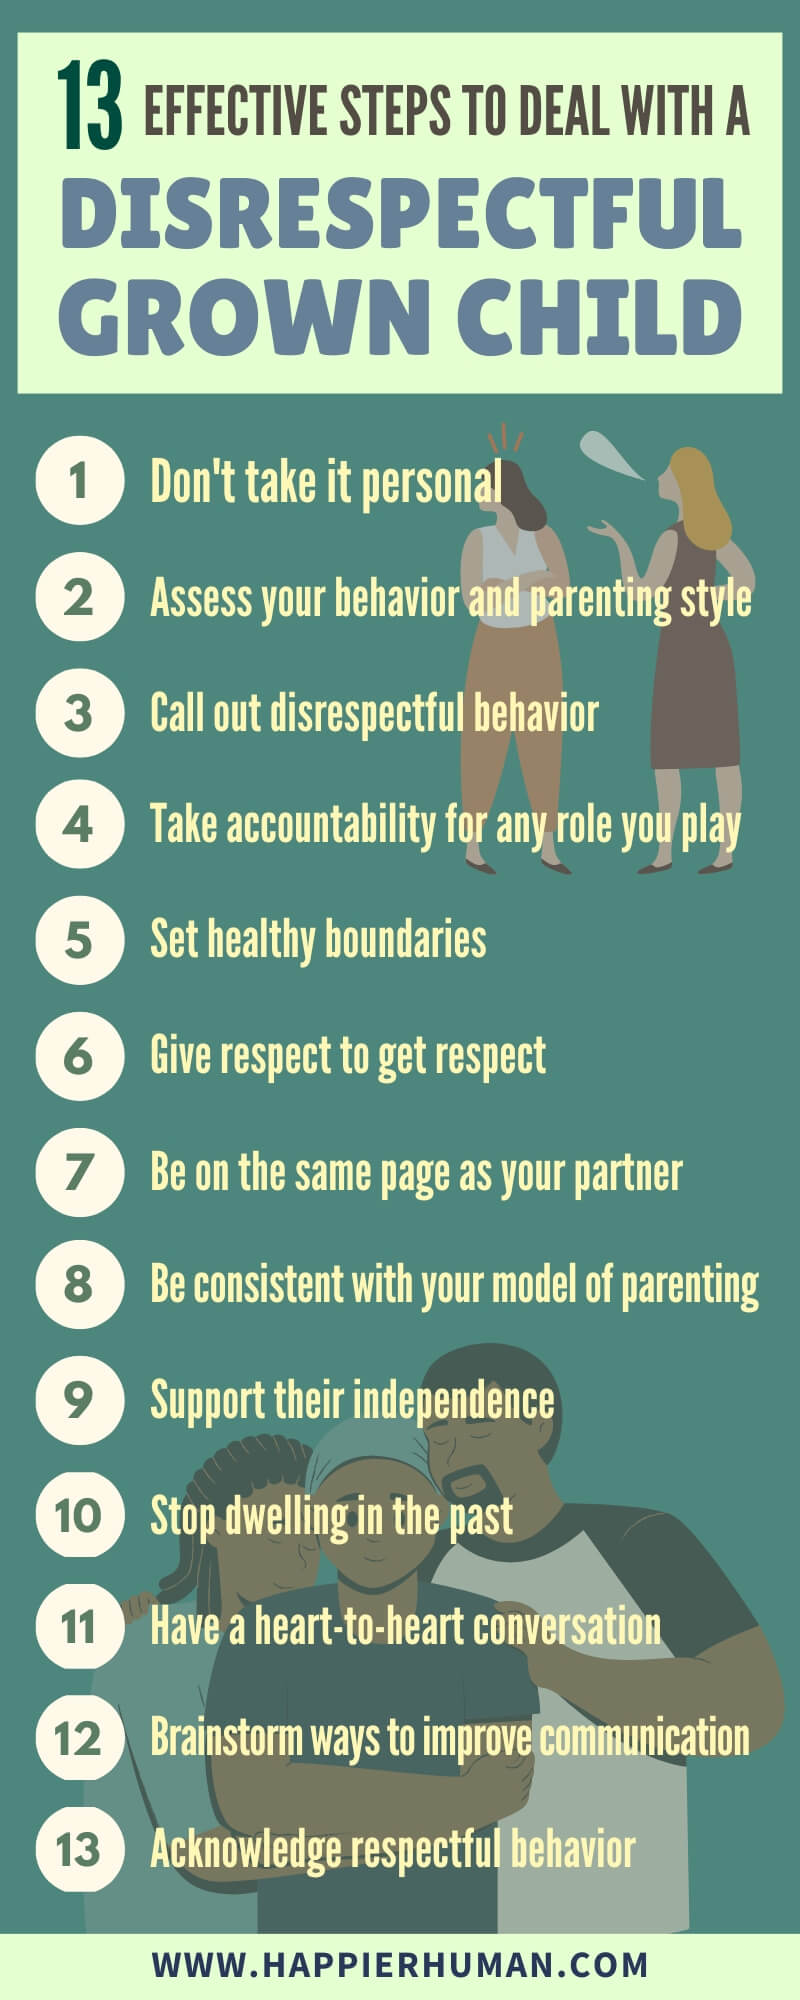 13 effective steps to deal with a disrespectful grown child